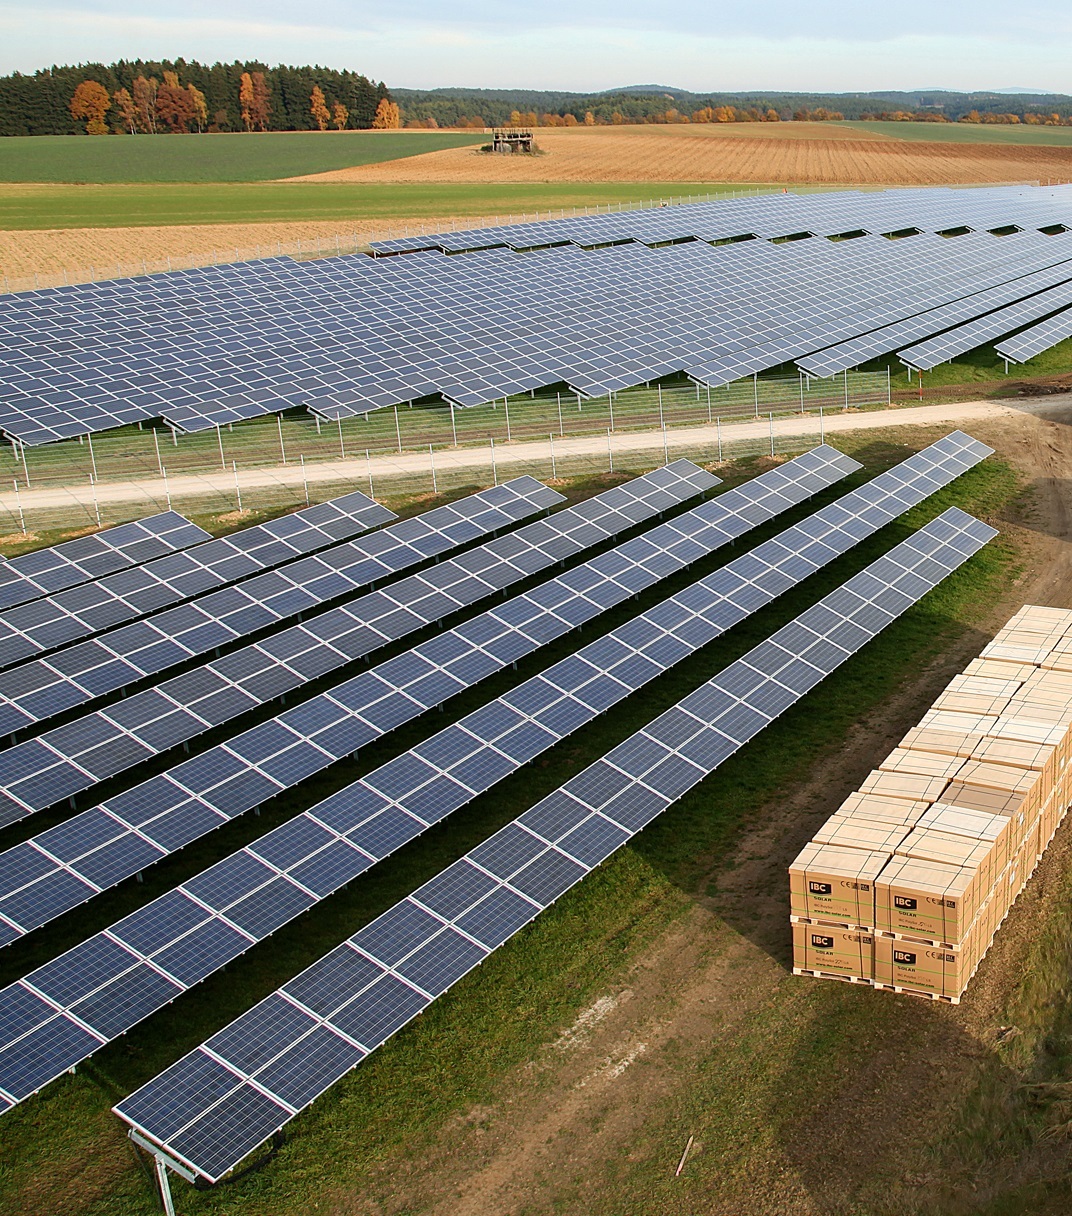 Spain: 4 GW new PV installations in 2019 - pv Europe